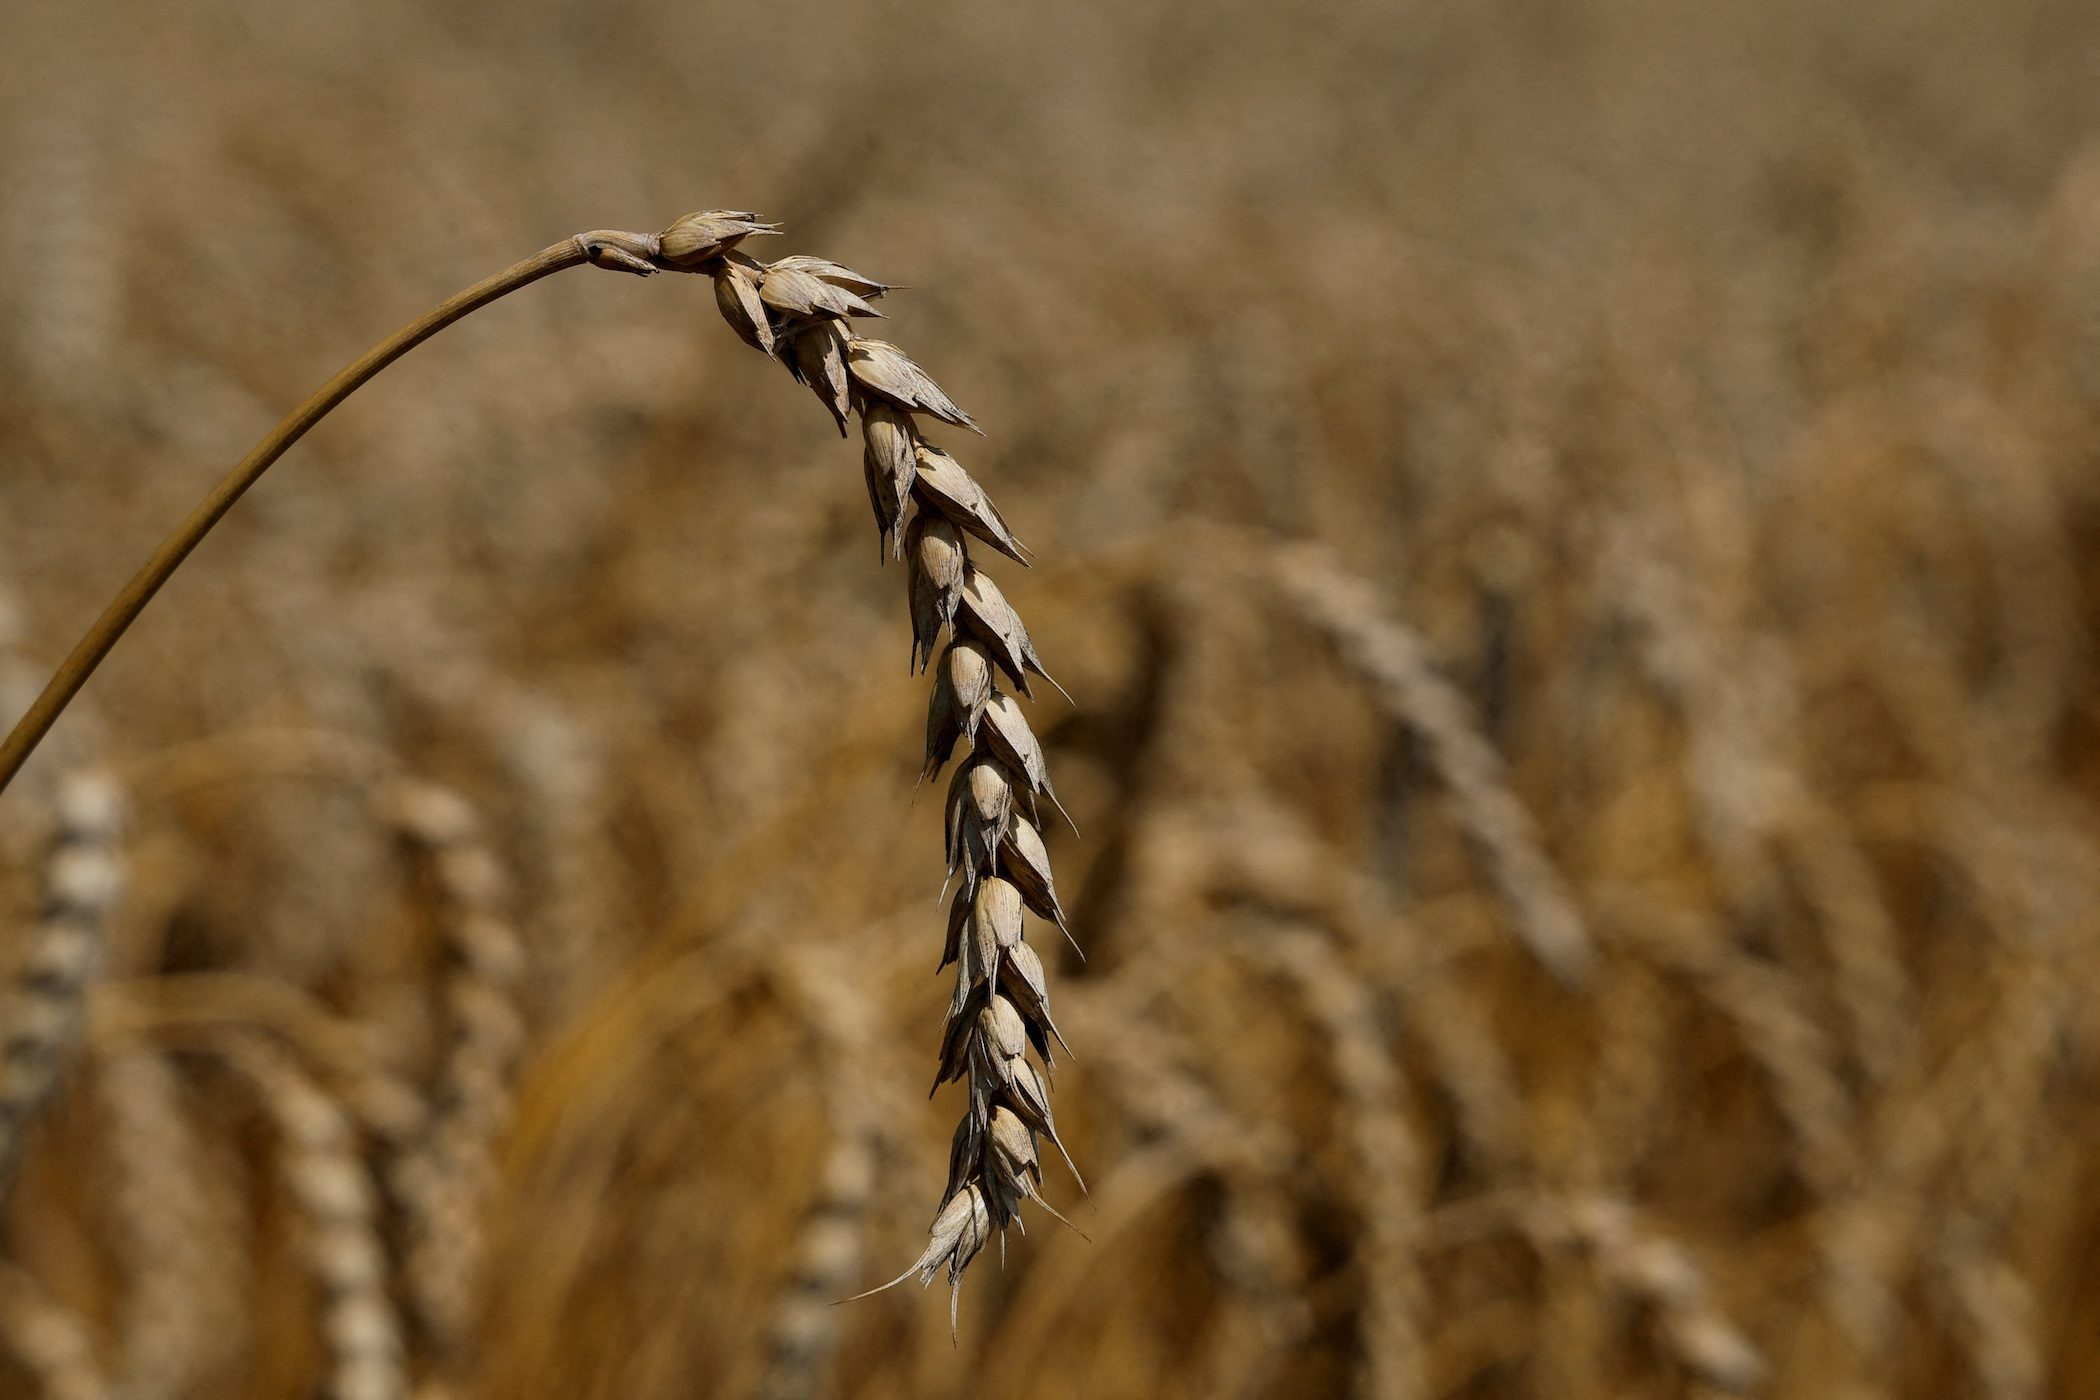 Wheat prices rise as missile strike threatens Ukraine export pact